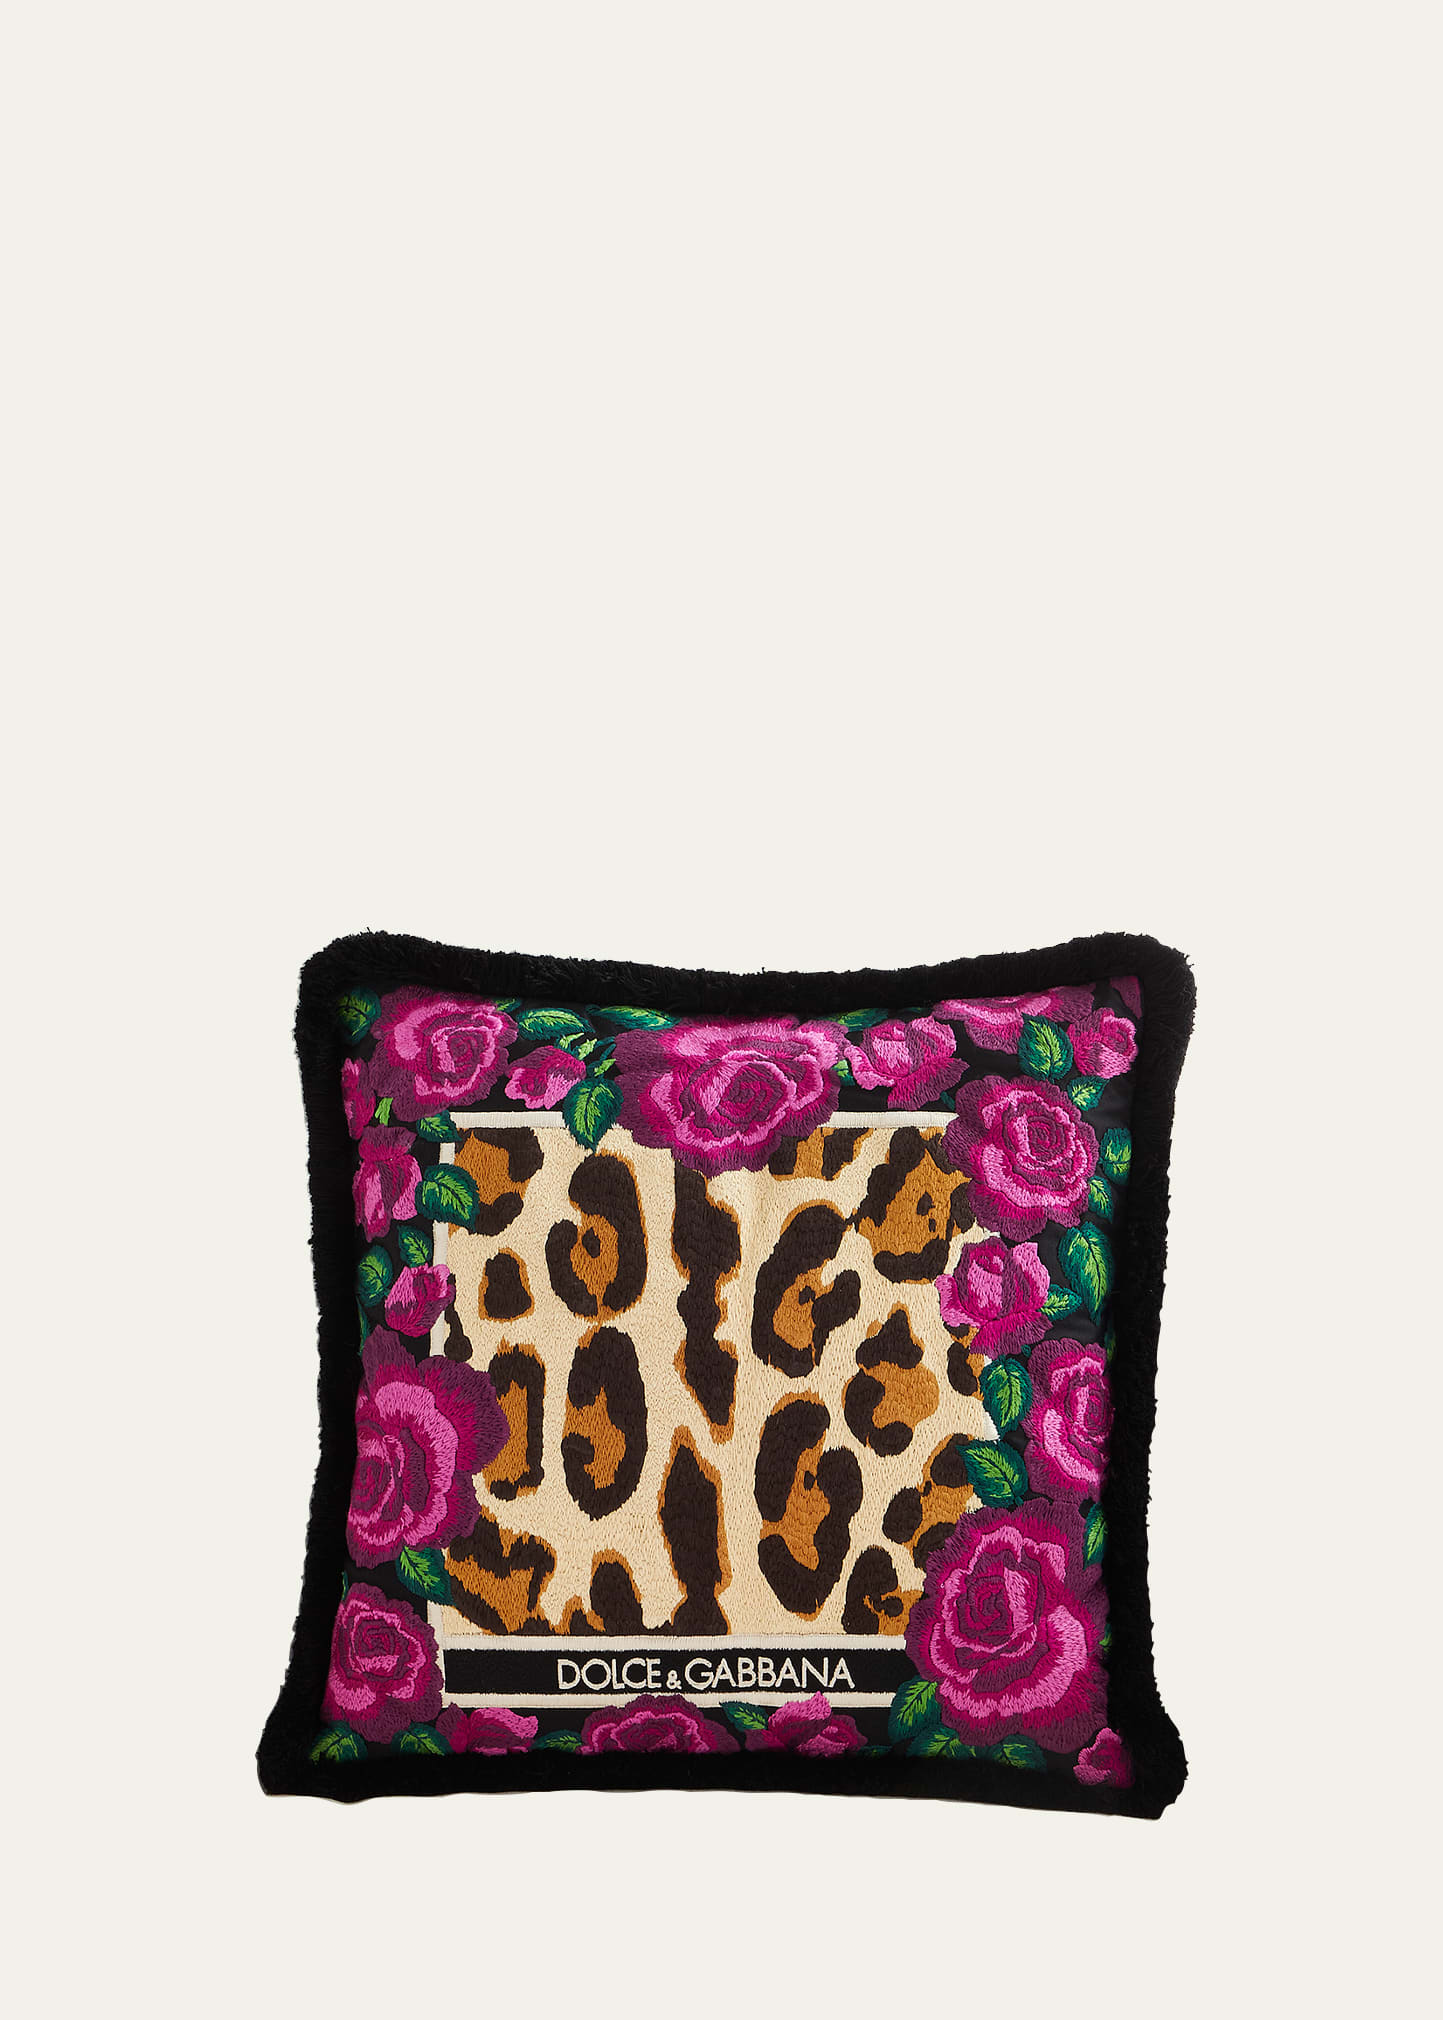 Leopard Embroidered Cushion, 16"